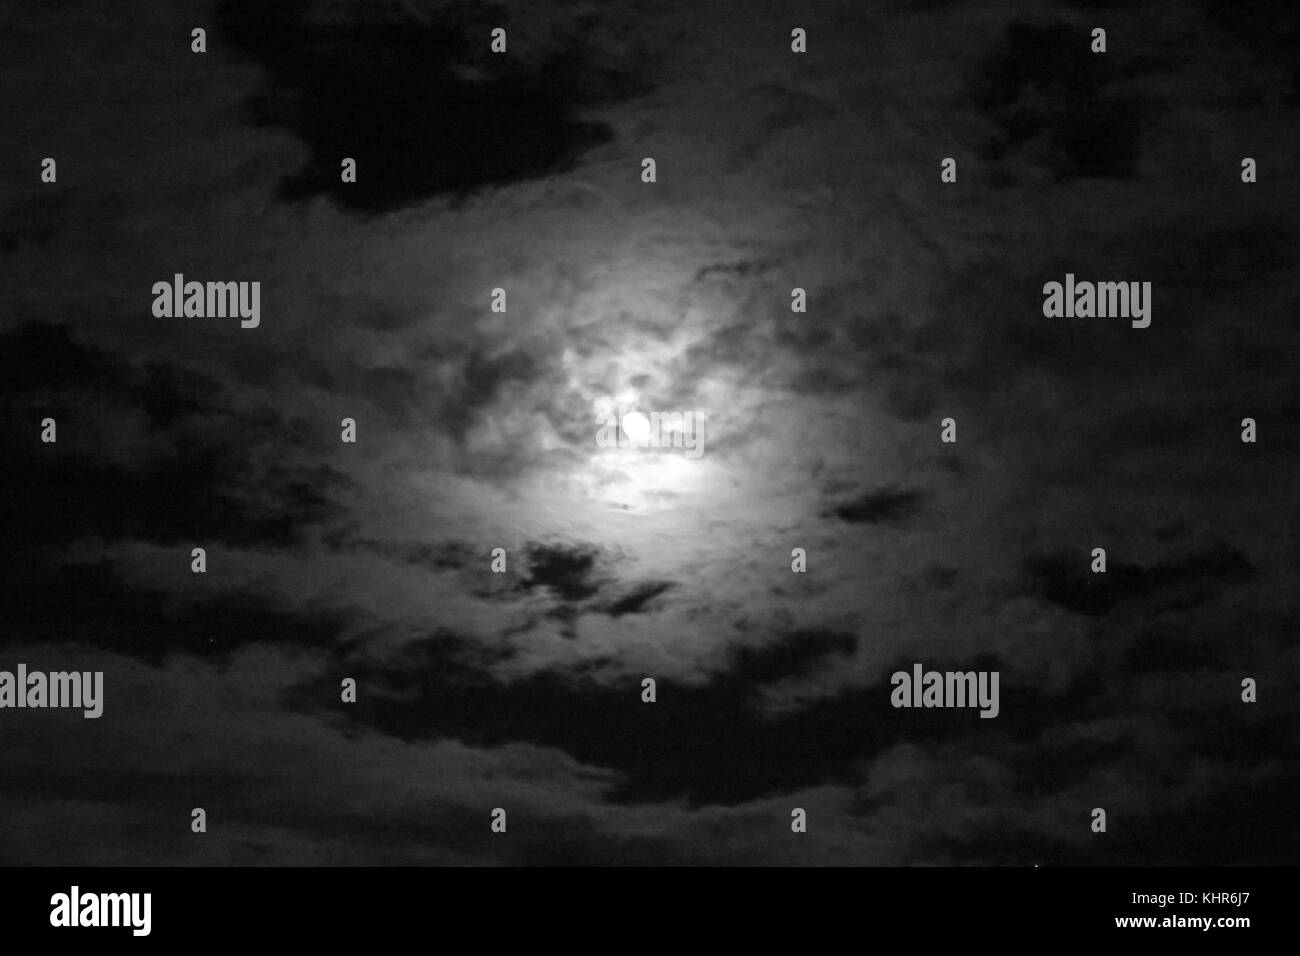 The moon peaking out from behind a cloudscape at night in black and white. Stock Photo